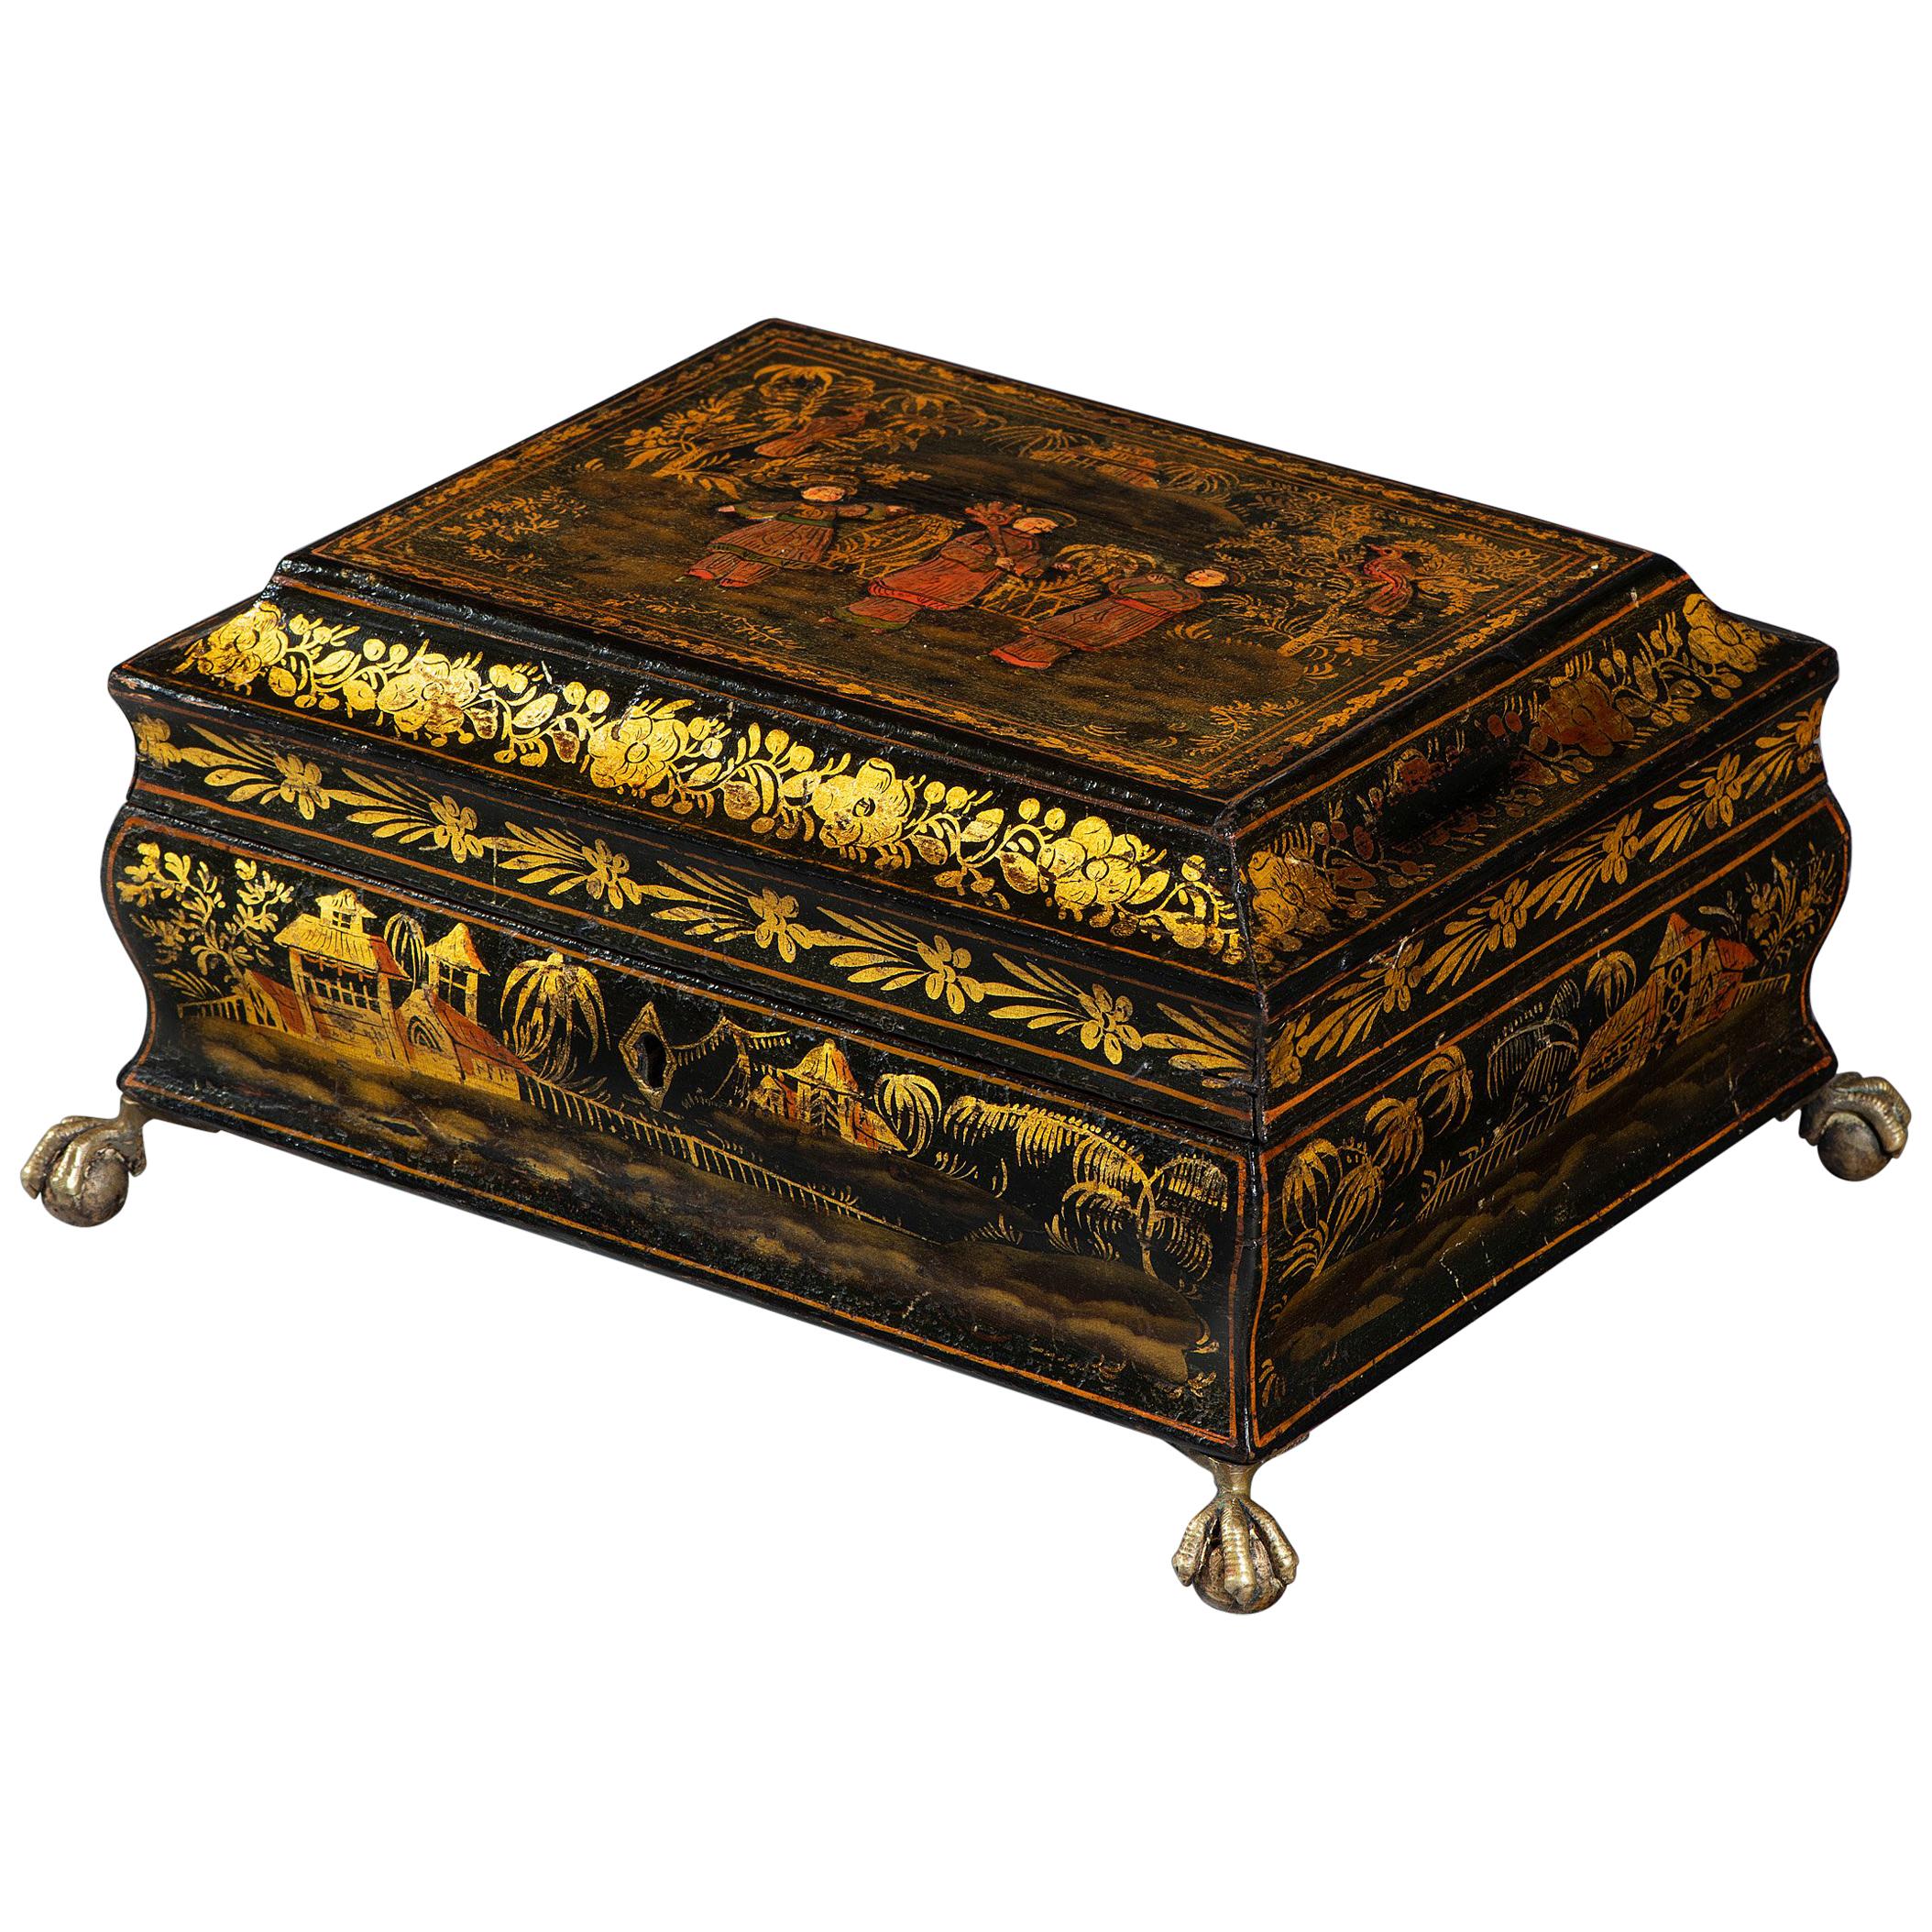 Early 19th Century Regency Period Japanned and Chinoiserie Lacquered Casket im Angebot